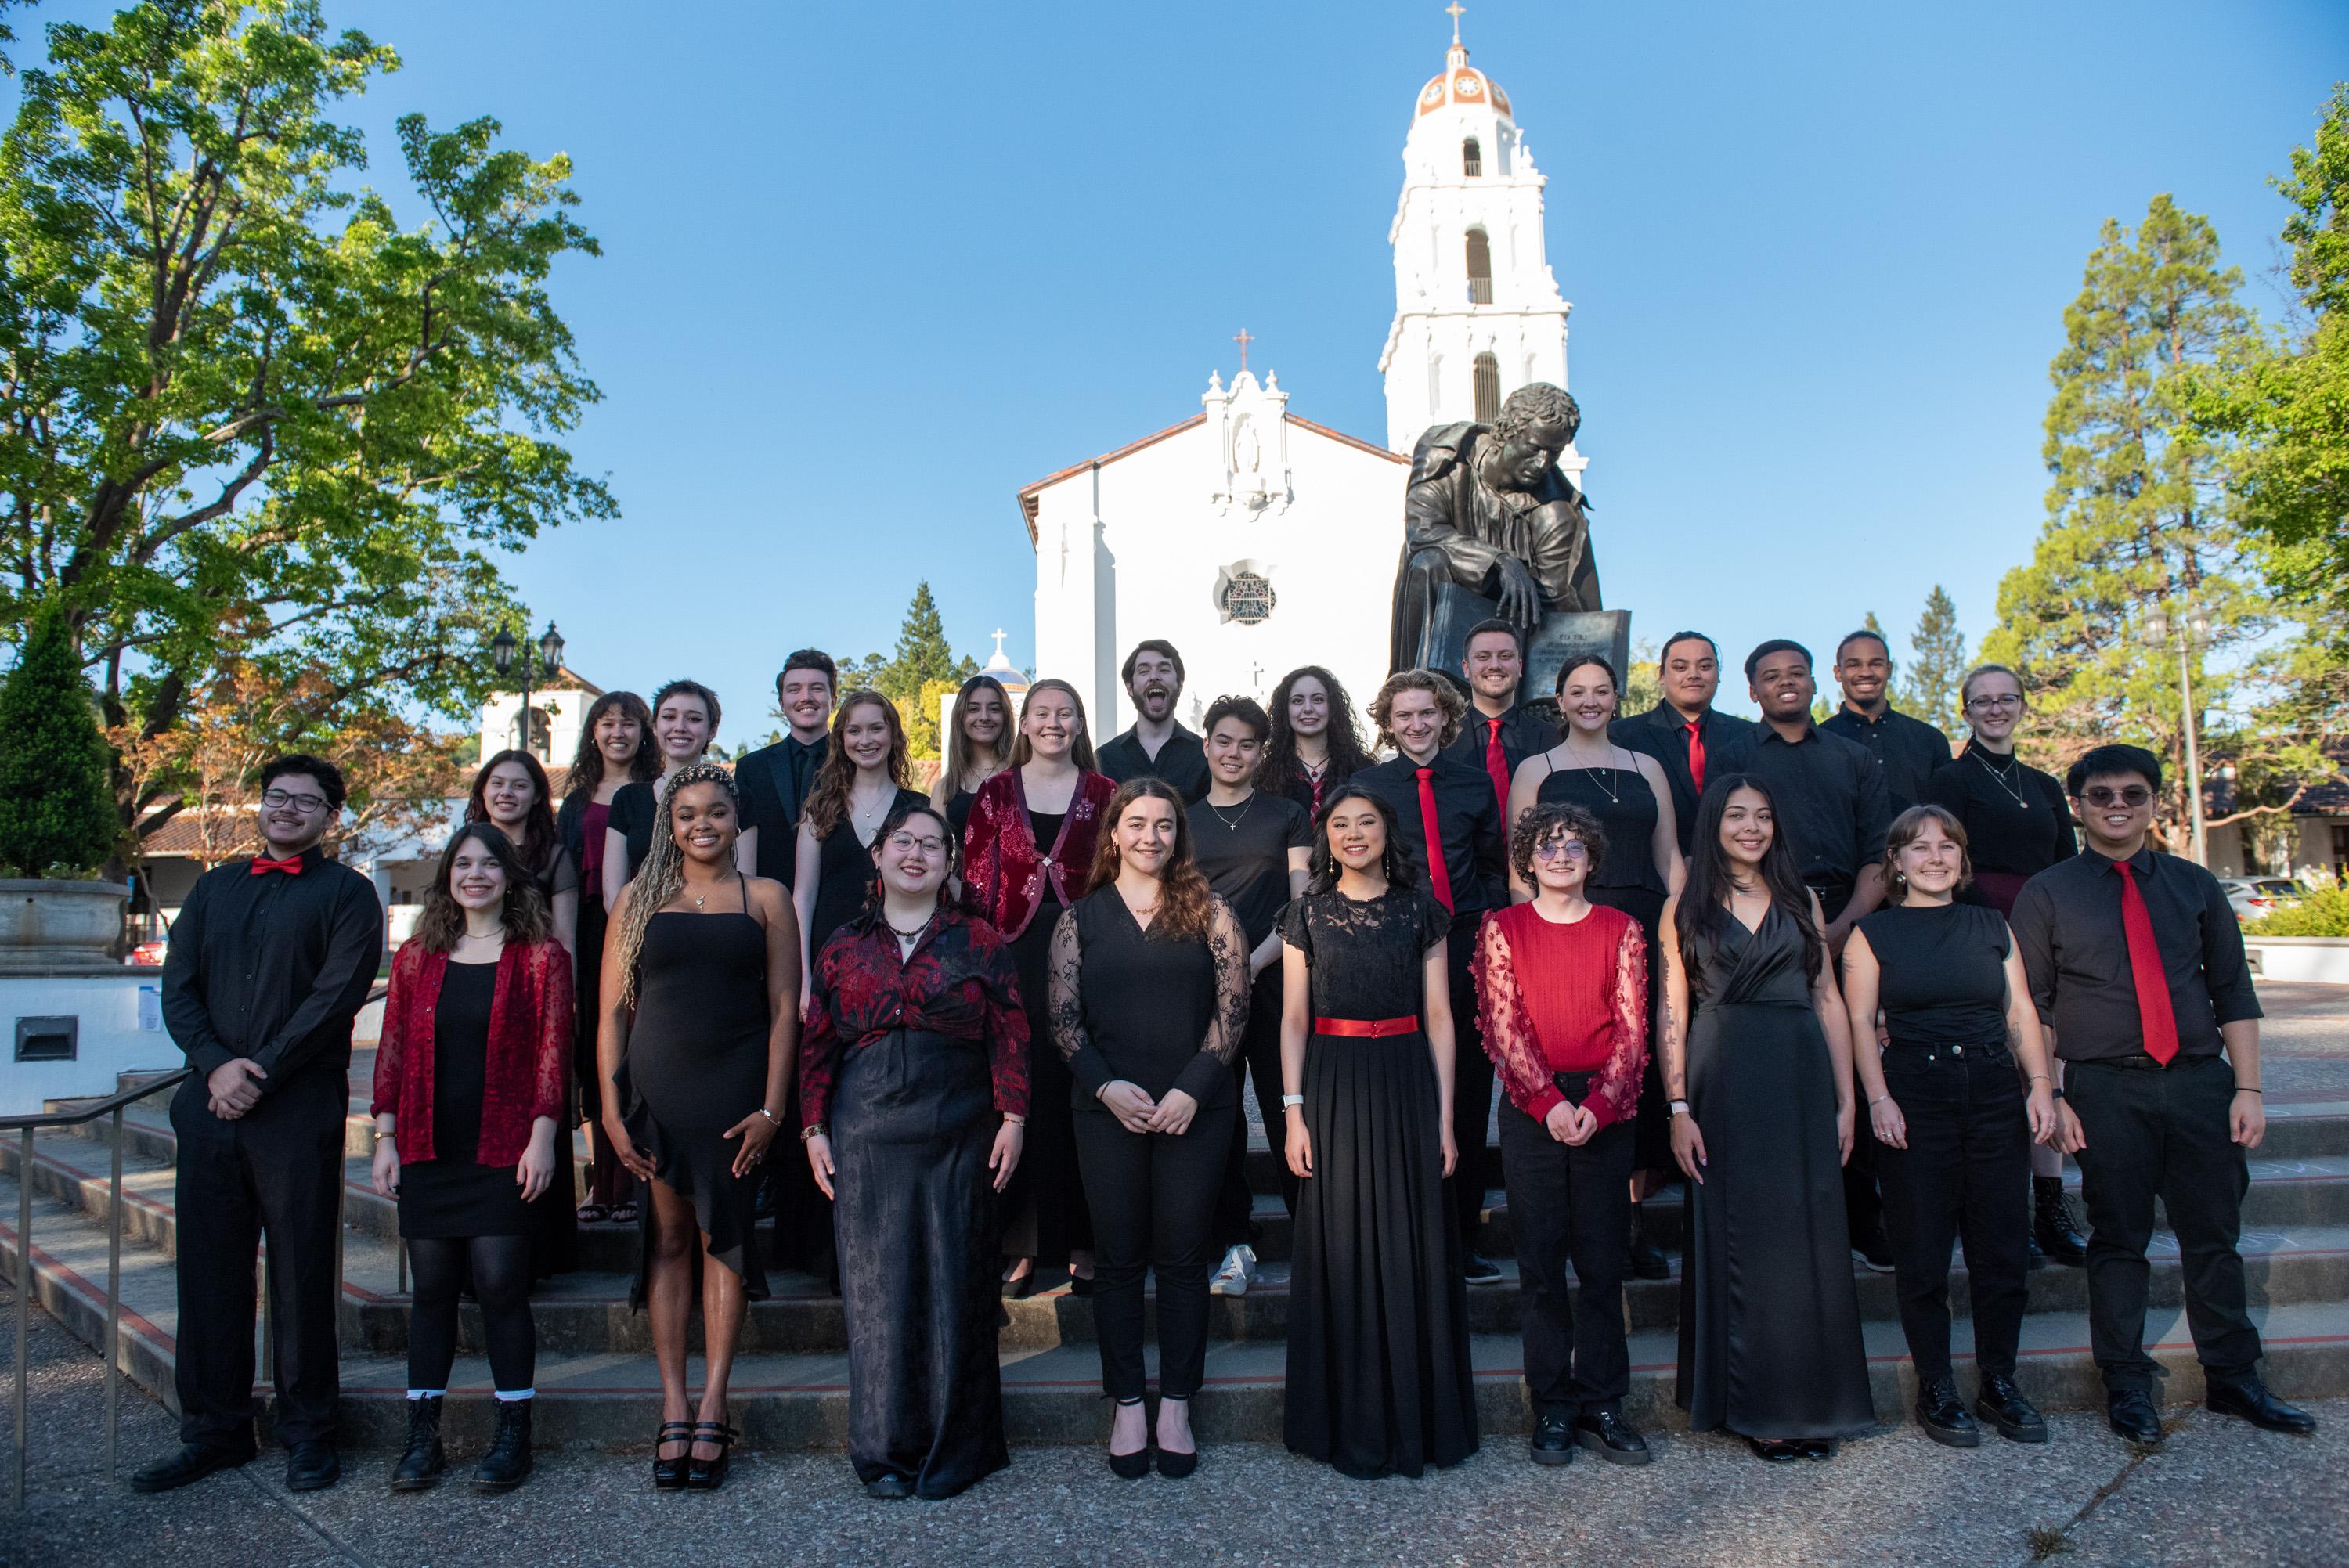 Saint Mary's College choir dressed in black and red stands in front of the SMC Chapel and statue of John Baptist de la Salle with a blue sky above them.